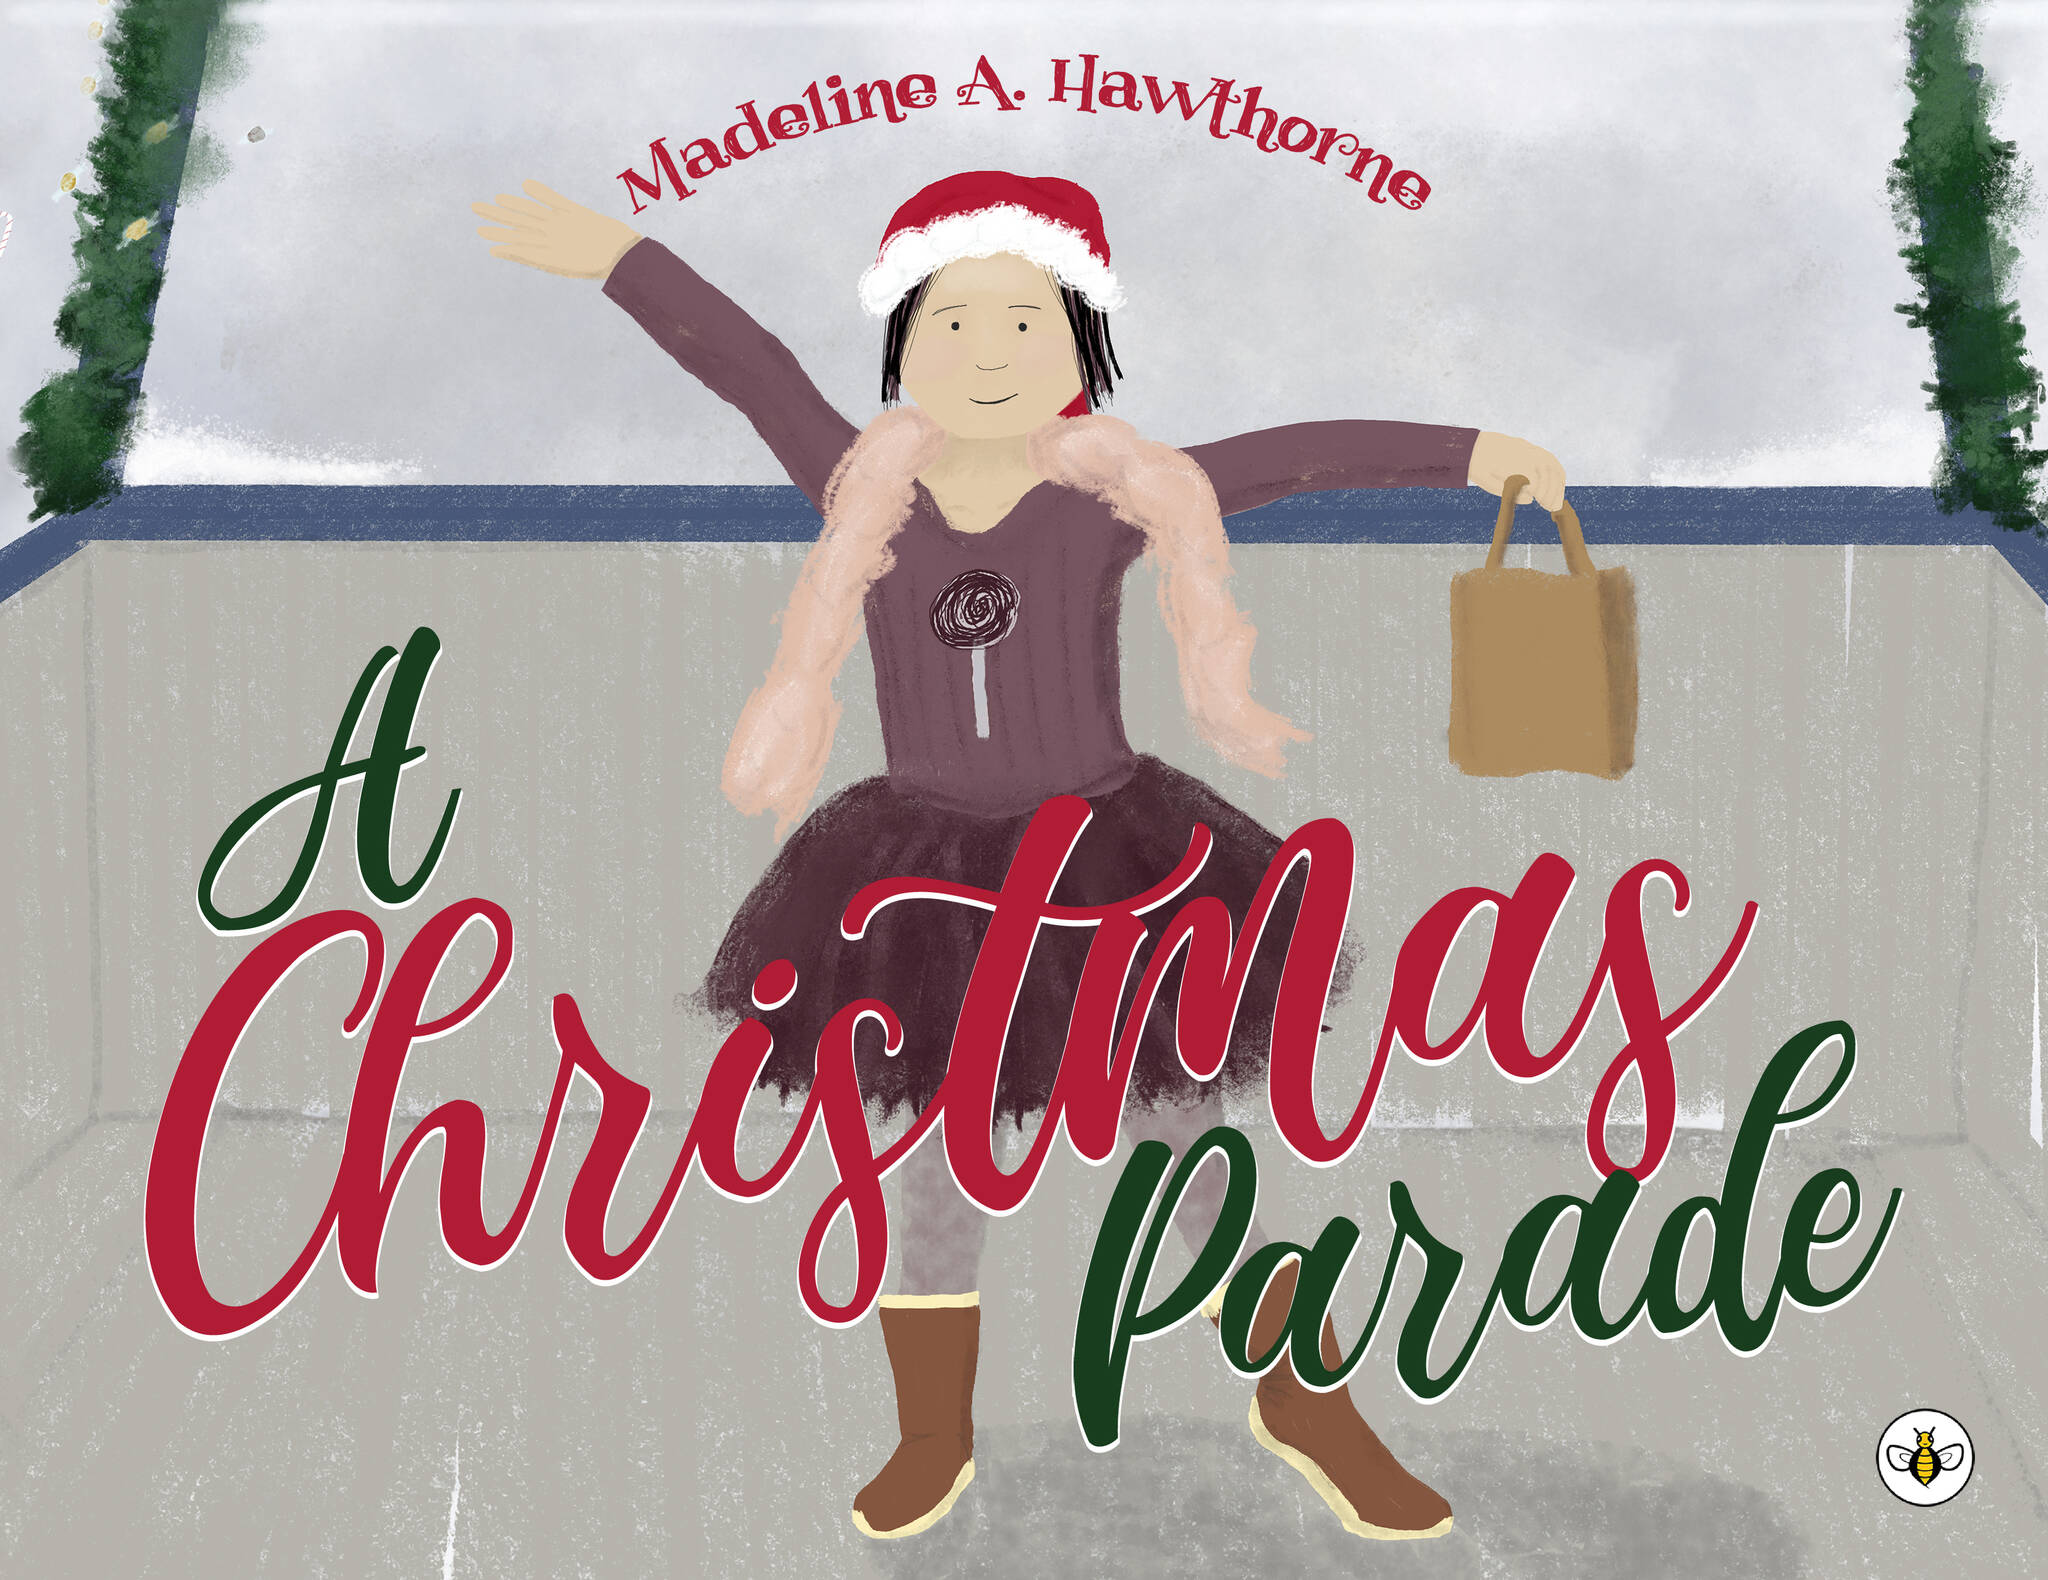 The cover of Madeline A. Hawthorne’s “A Christmas Parade,” published by Olympia Publishing.